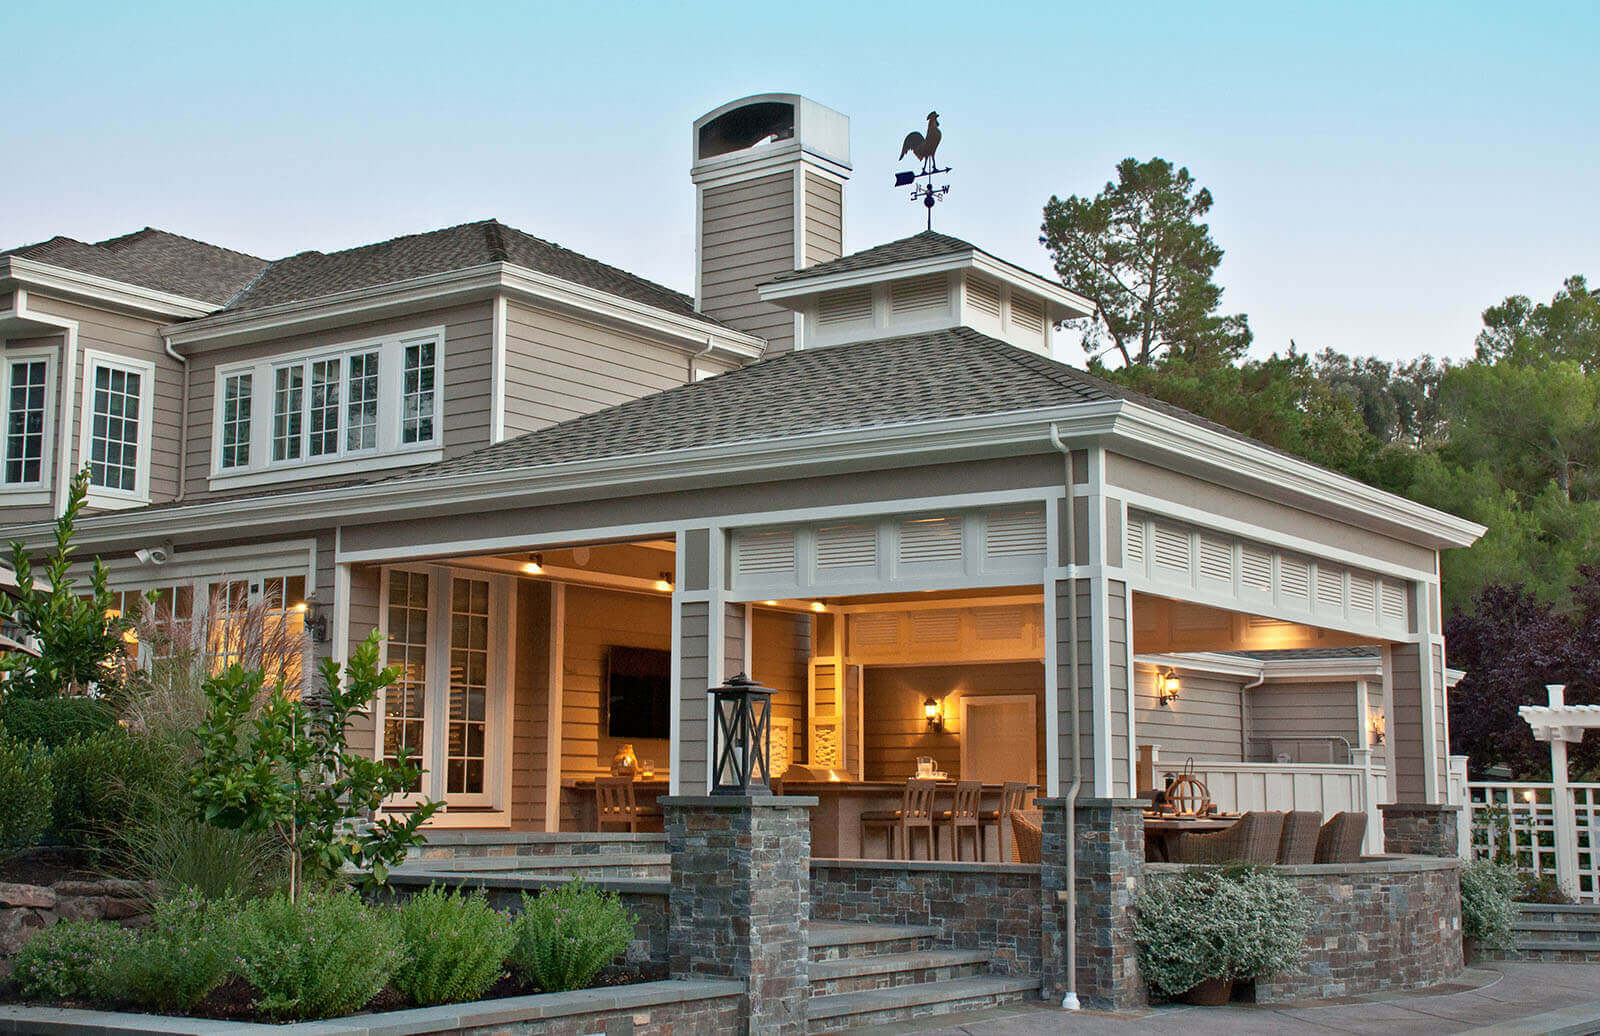 Contemporary farmhouse-style covered veranda with ambient mood lighting, dining area, and kitchen on terraced patio with steps leading down to the landscape